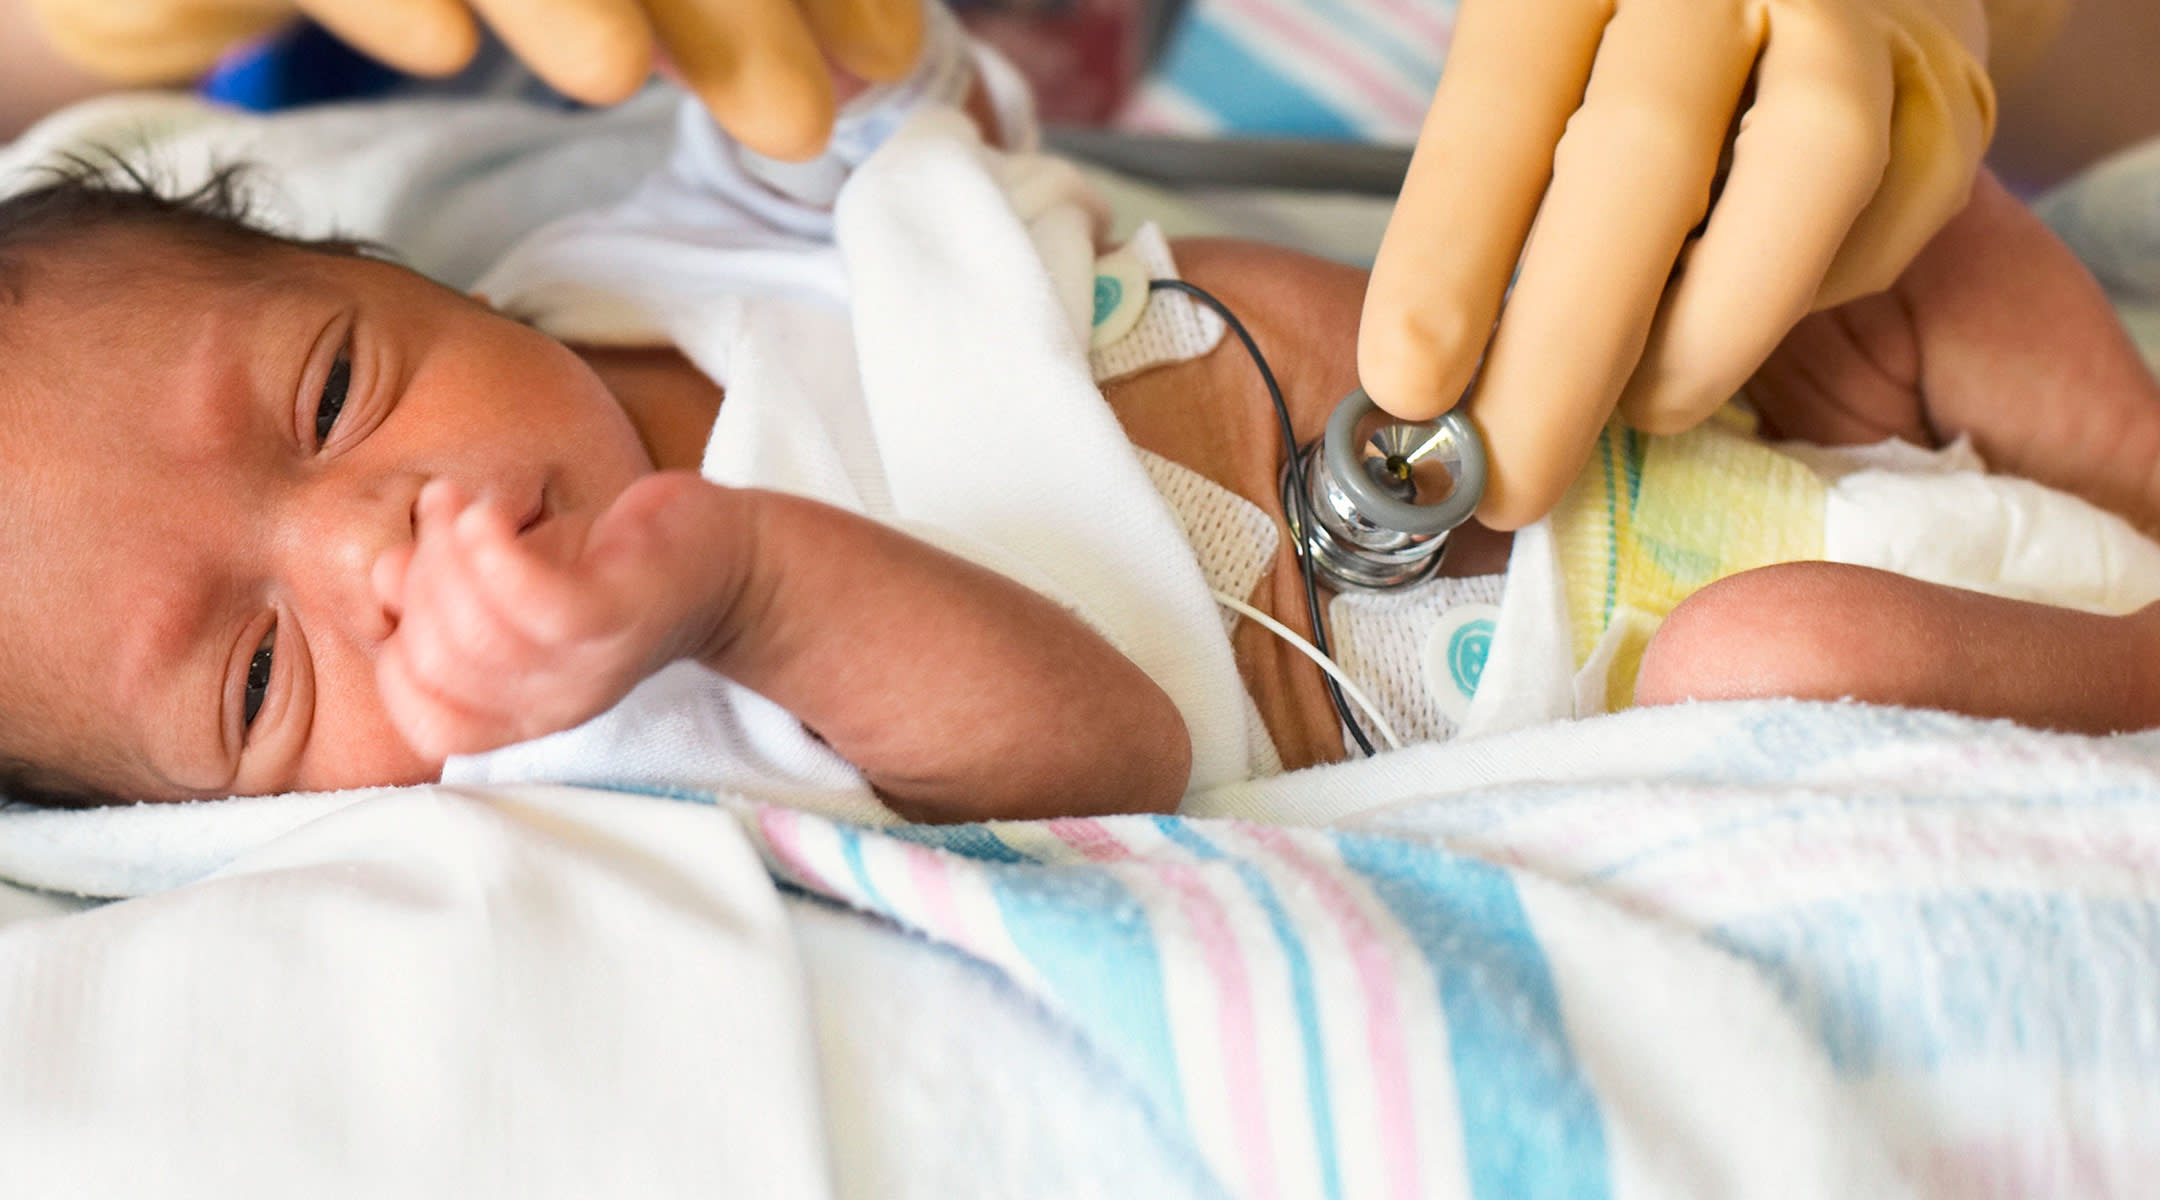 AAP Discourages Medicating Preemies with Reflux